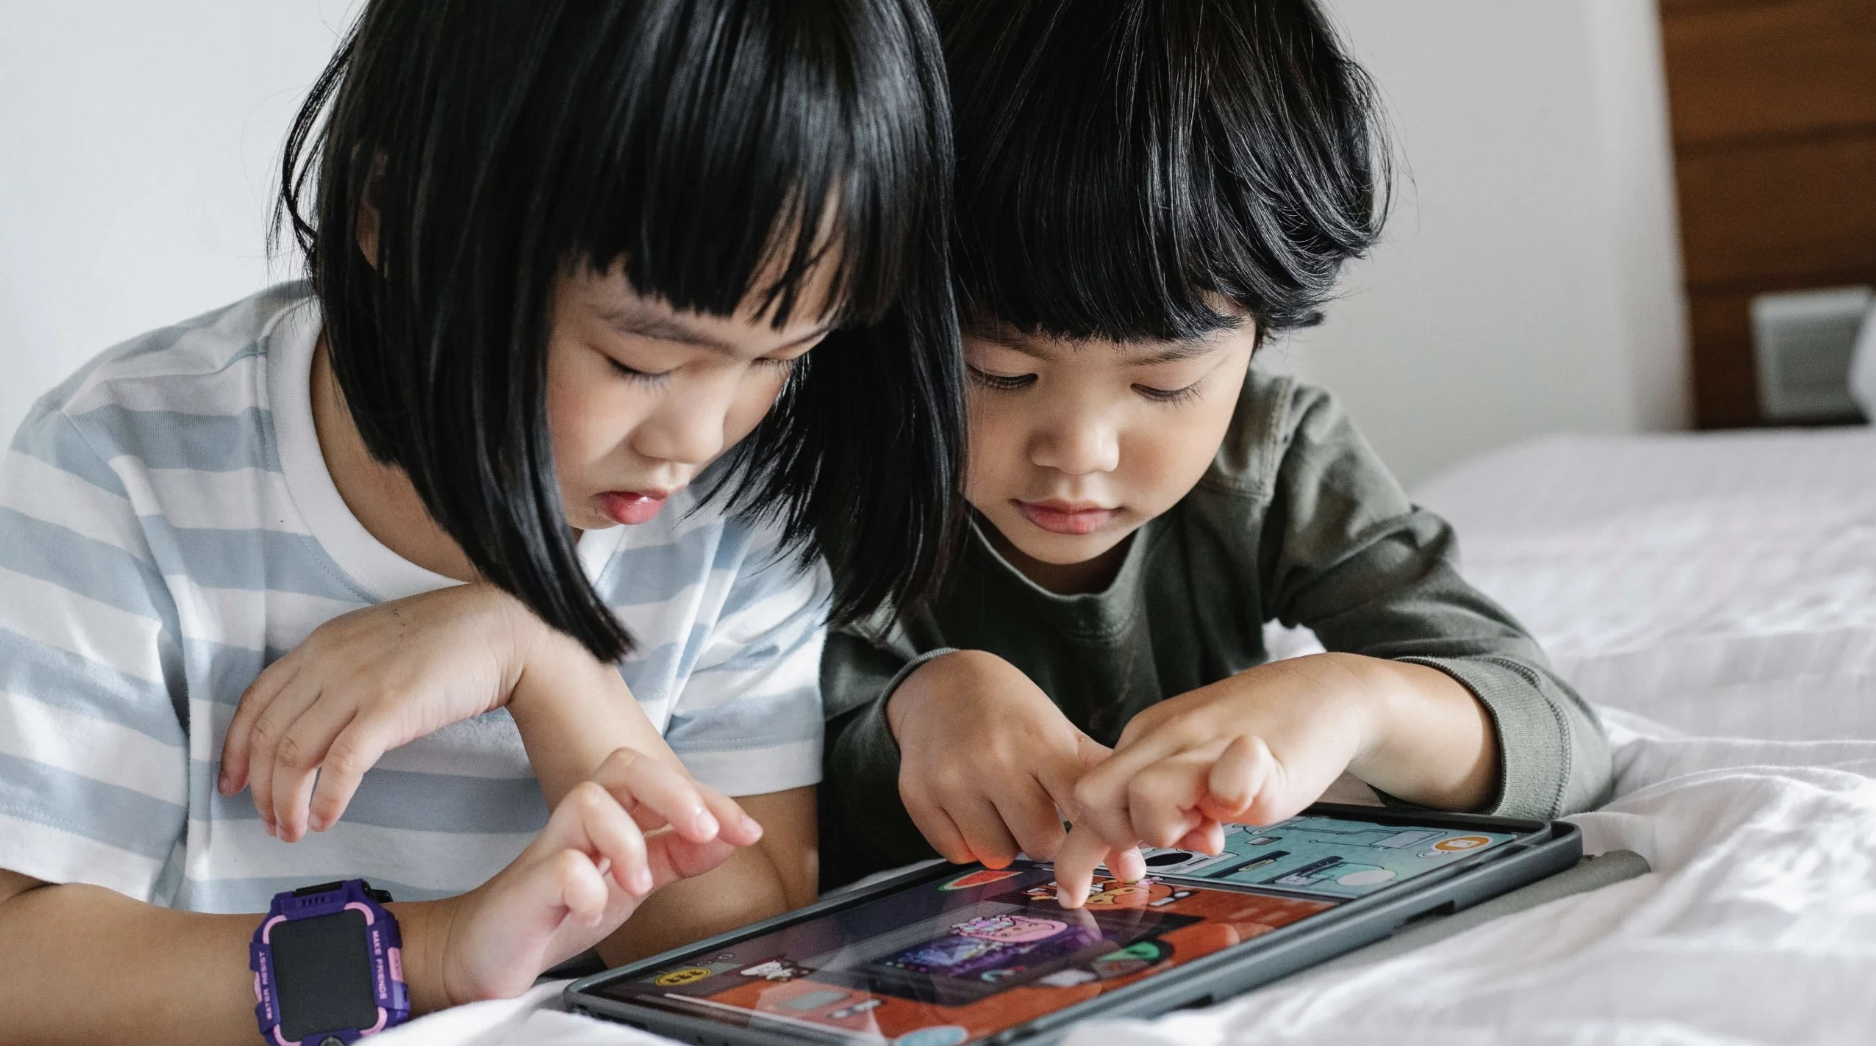 Two young children play on an iPad together.